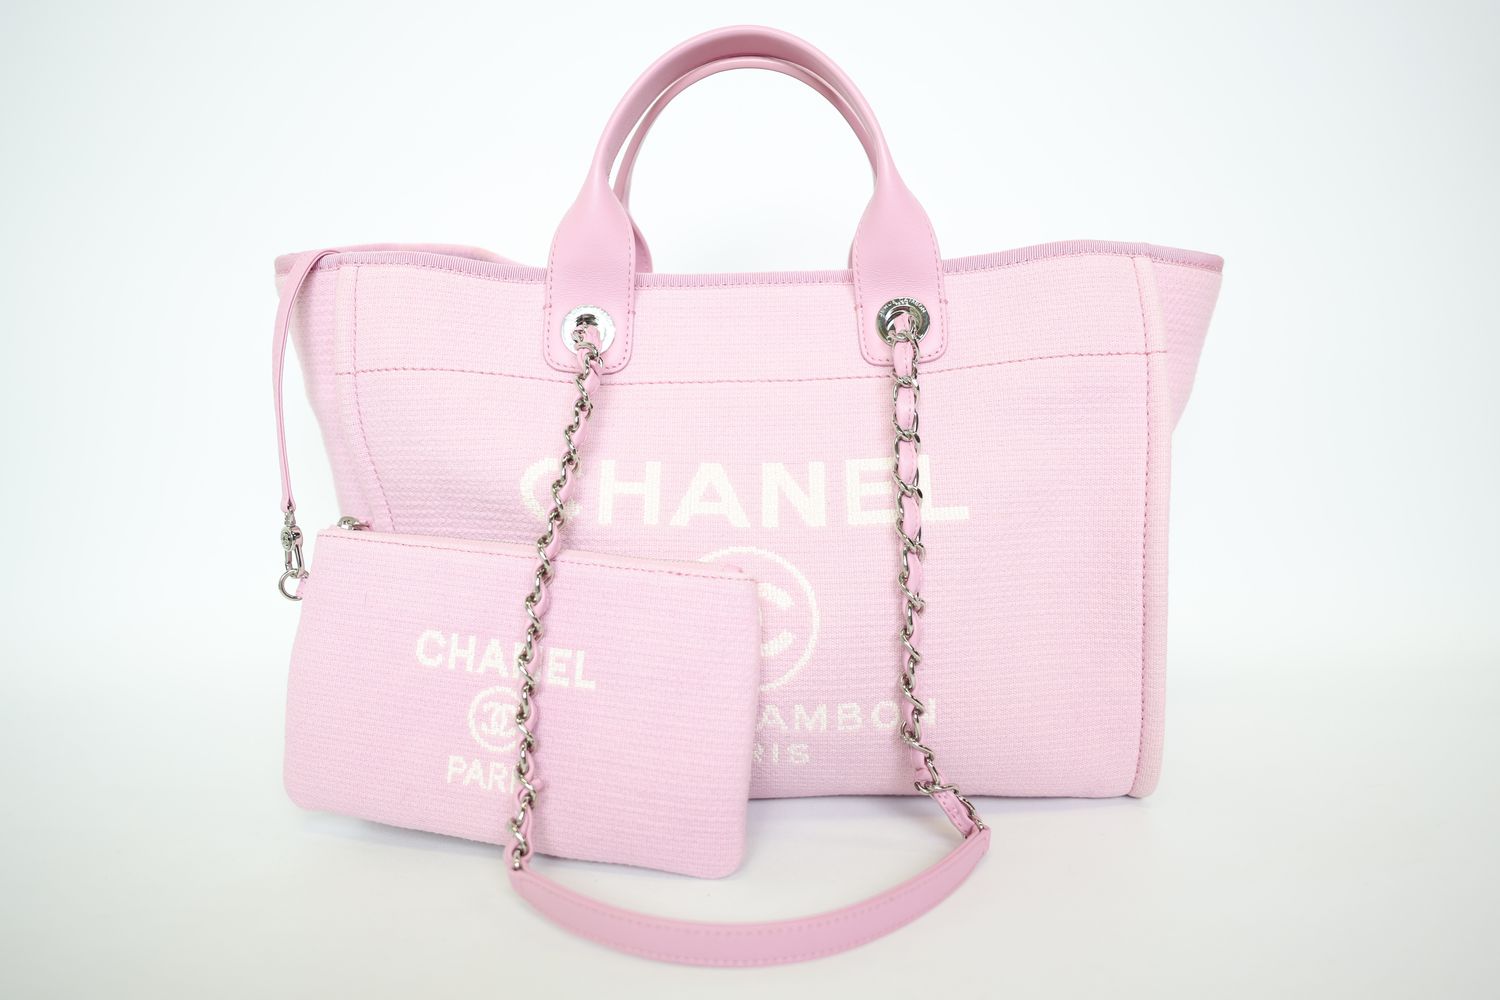 Chanel Deauville Tote Large, Pink with Silver Hardware, Preowned In Box WA001